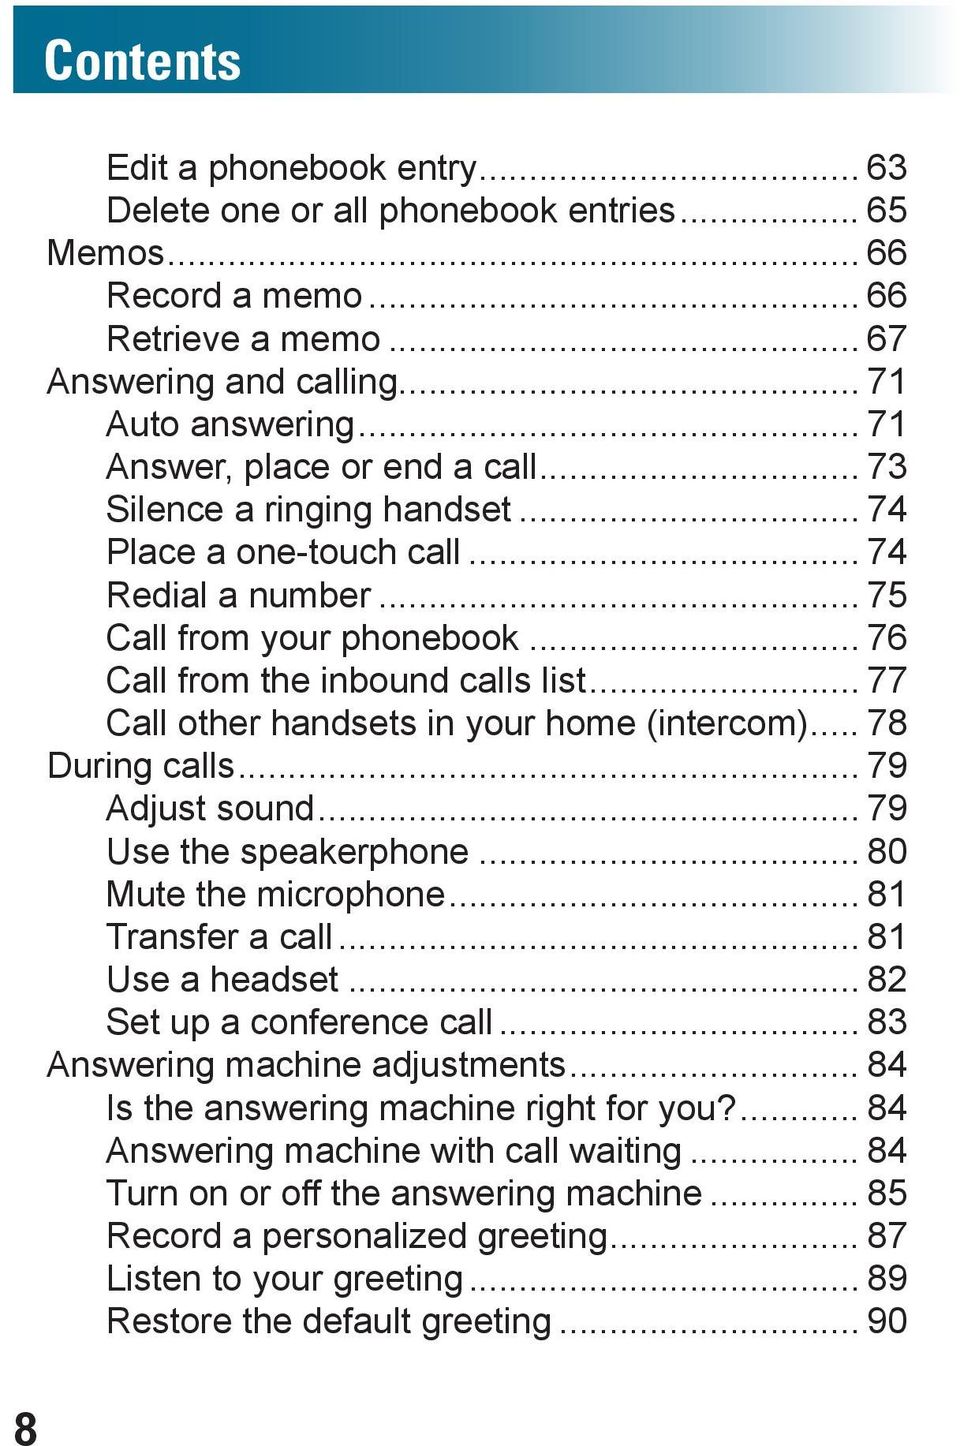 .. 77 Call other handsets in your home (intercom)... 78 During calls... 79 Adjust sound... 79 Use the speakerphone... 80 Mute the microphone... 81 Transfer a call... 81 Use a headset.